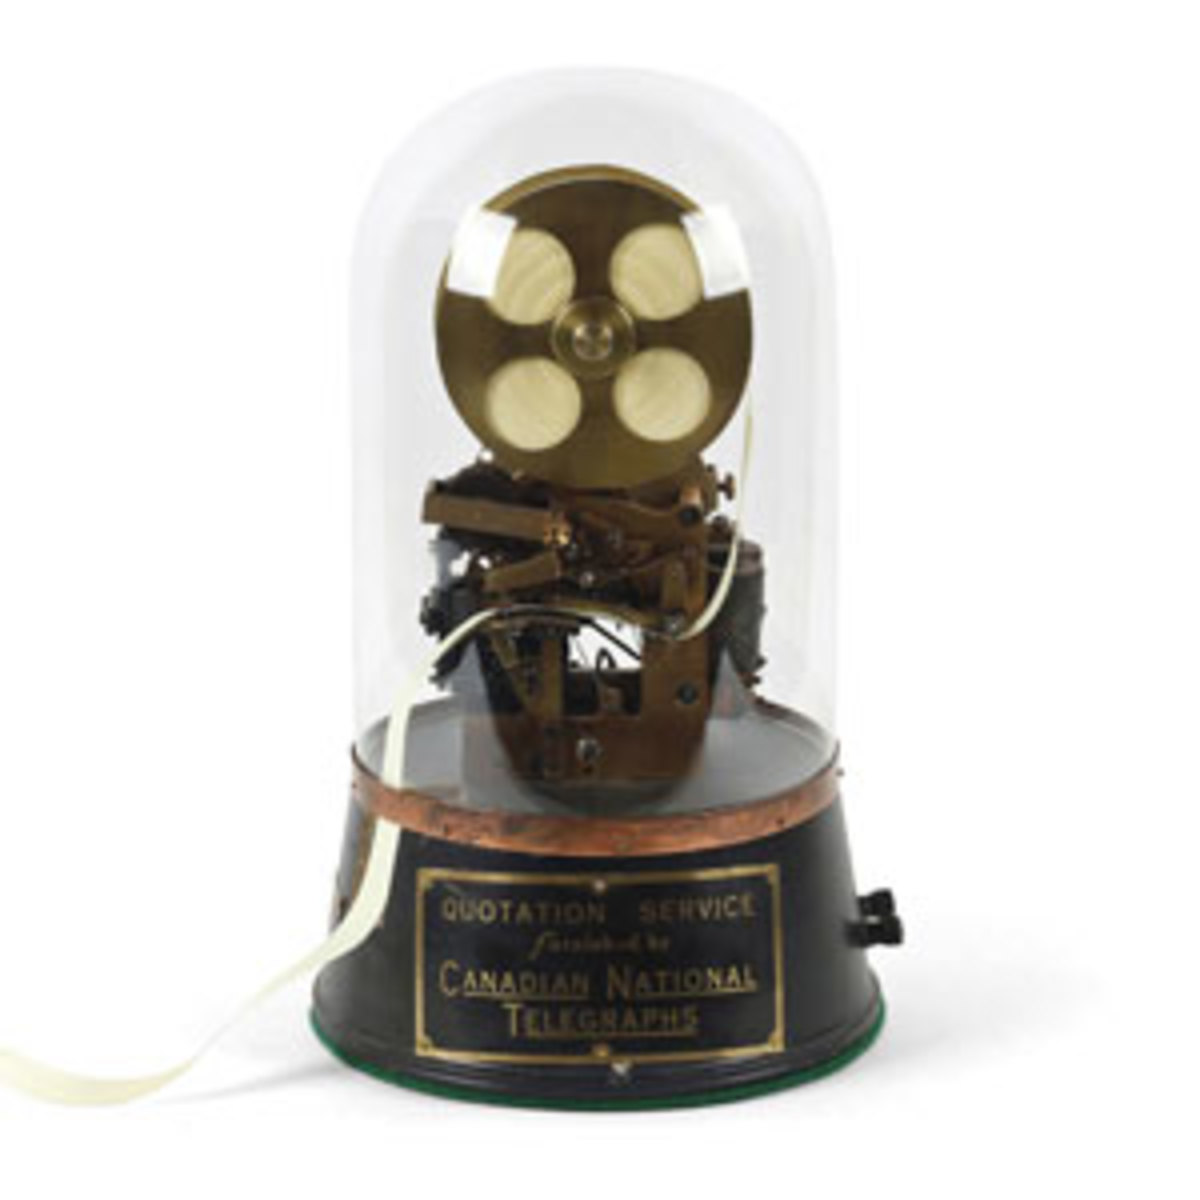  This rare, early 1900s Canadian National Telegraphs stock ticker was the top lot at $11,800.